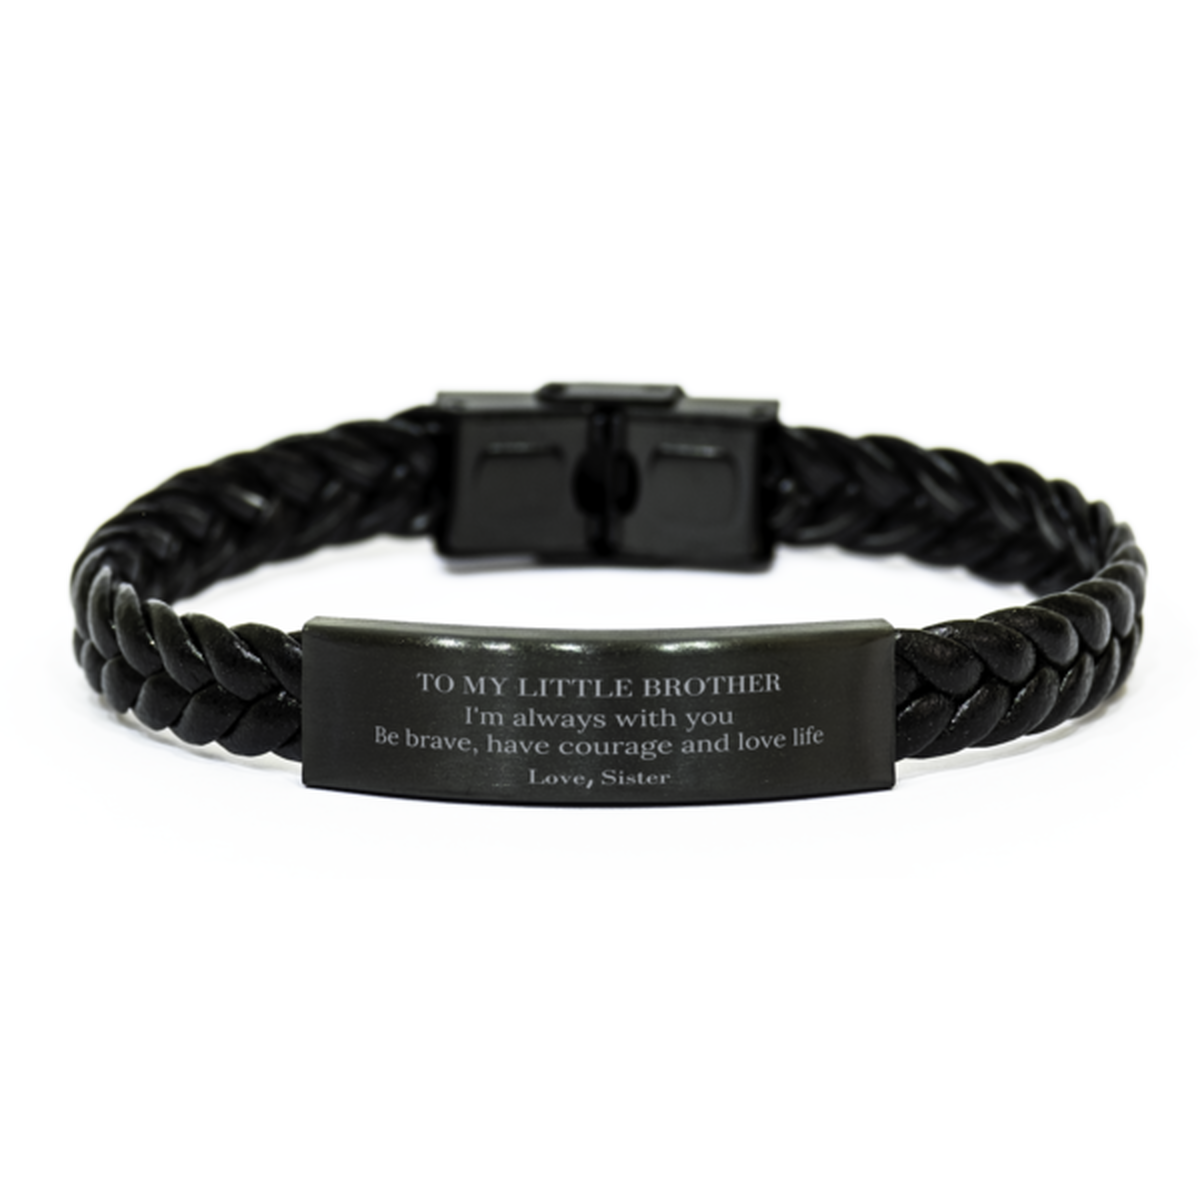 To My Little Brother Gifts from Sister, Unique Braided Leather Bracelet Inspirational Christmas Birthday Graduation Gifts for Little Brother I'm always with you. Be brave, have courage and love life. Love, Sister